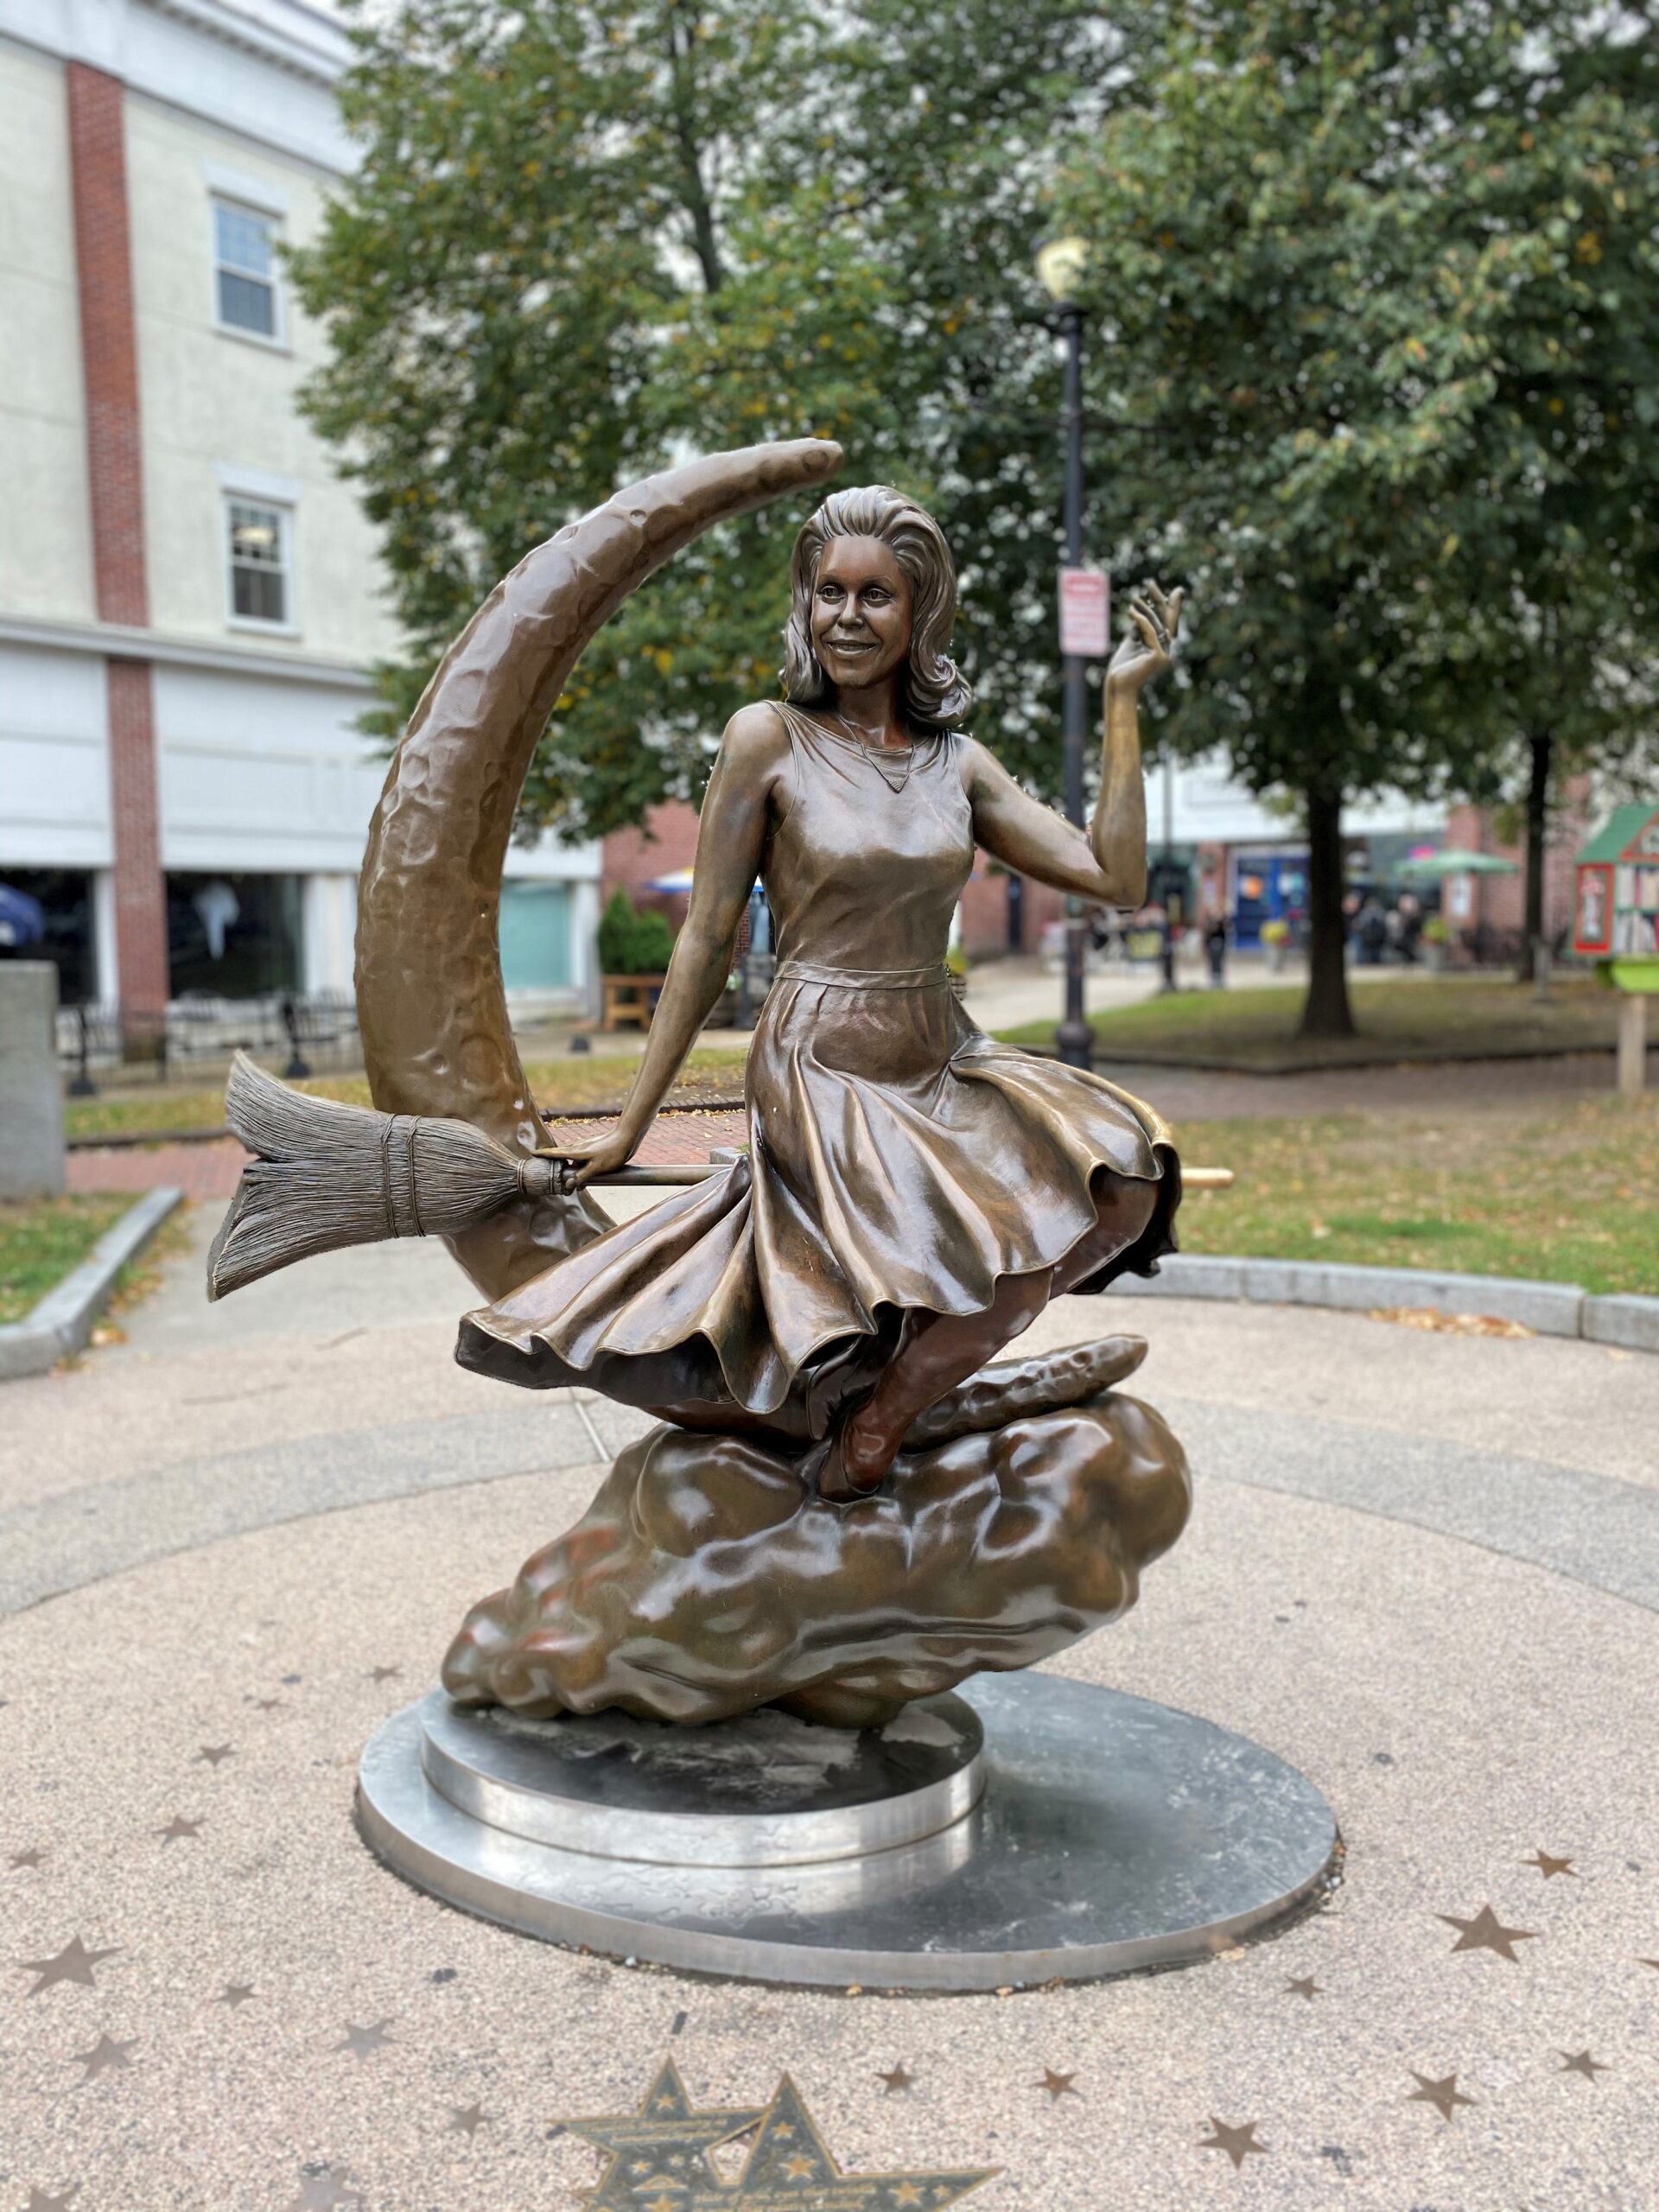 Bewitched Statue in Salem, Massachusetts